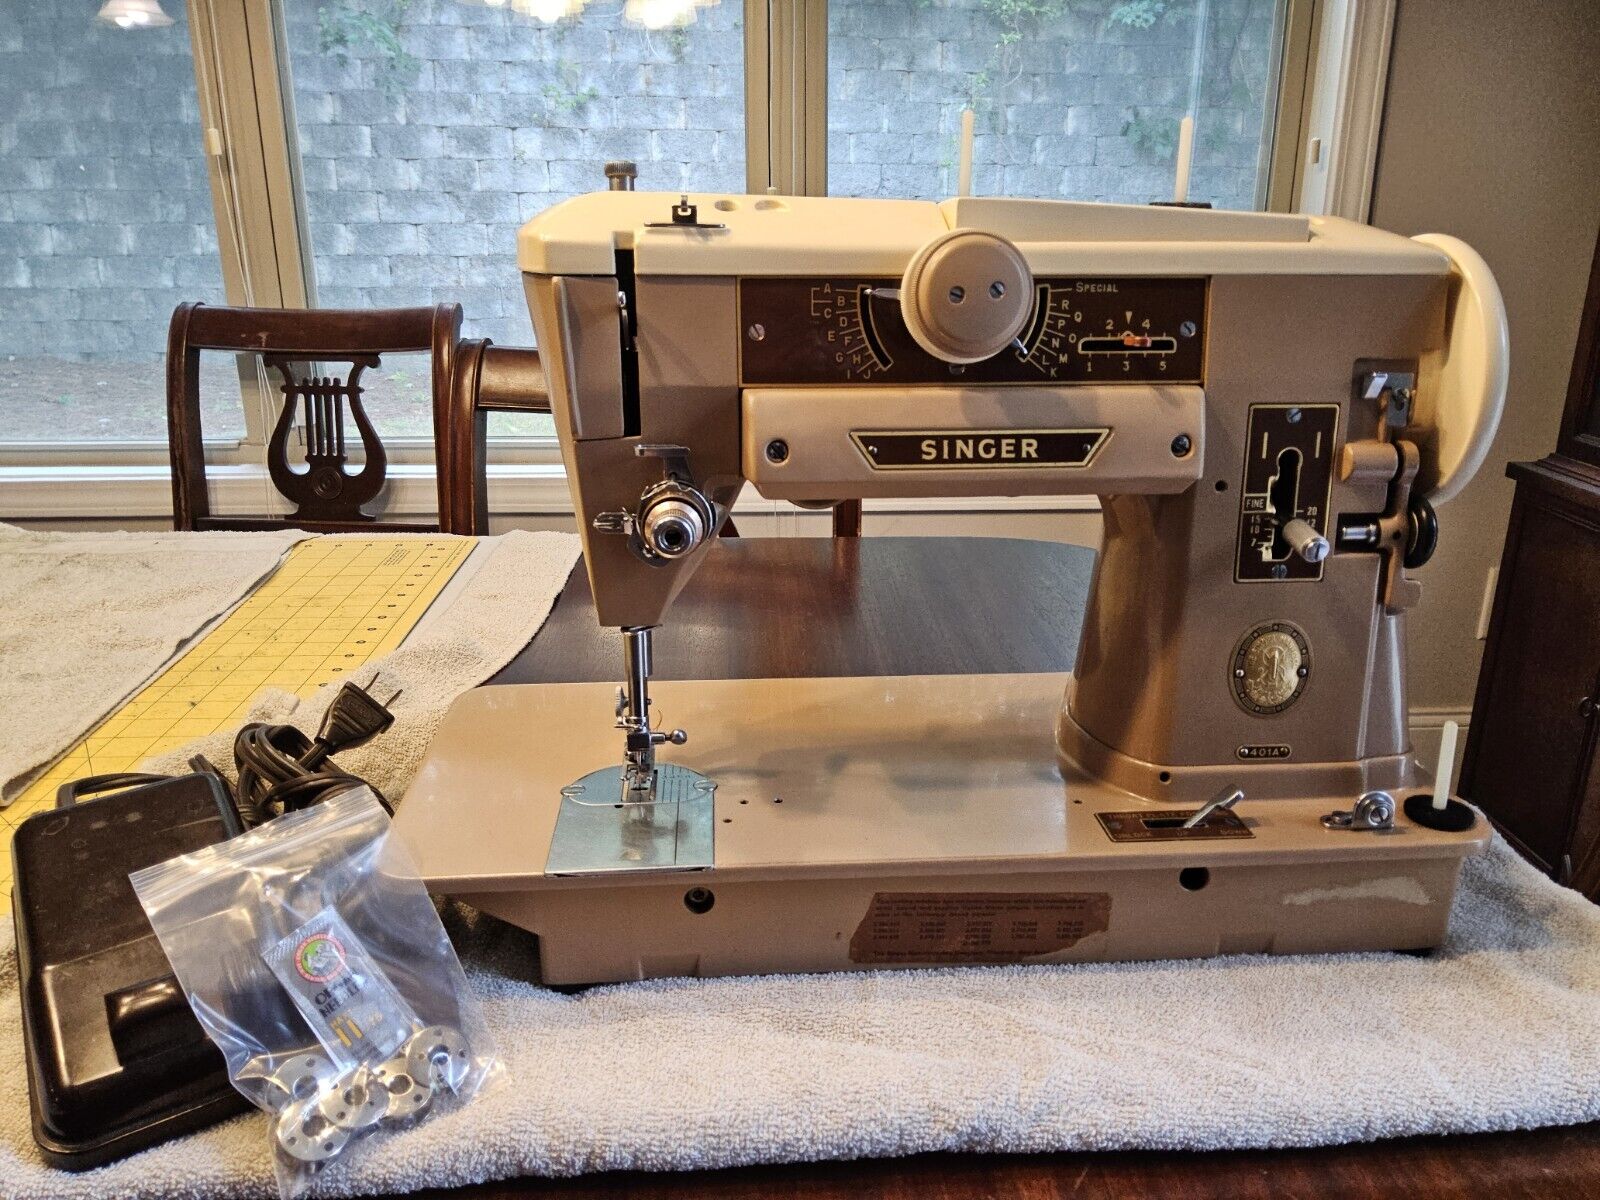 Singer 401a sewing machine cleaned and serviced Good cond SN NA779115